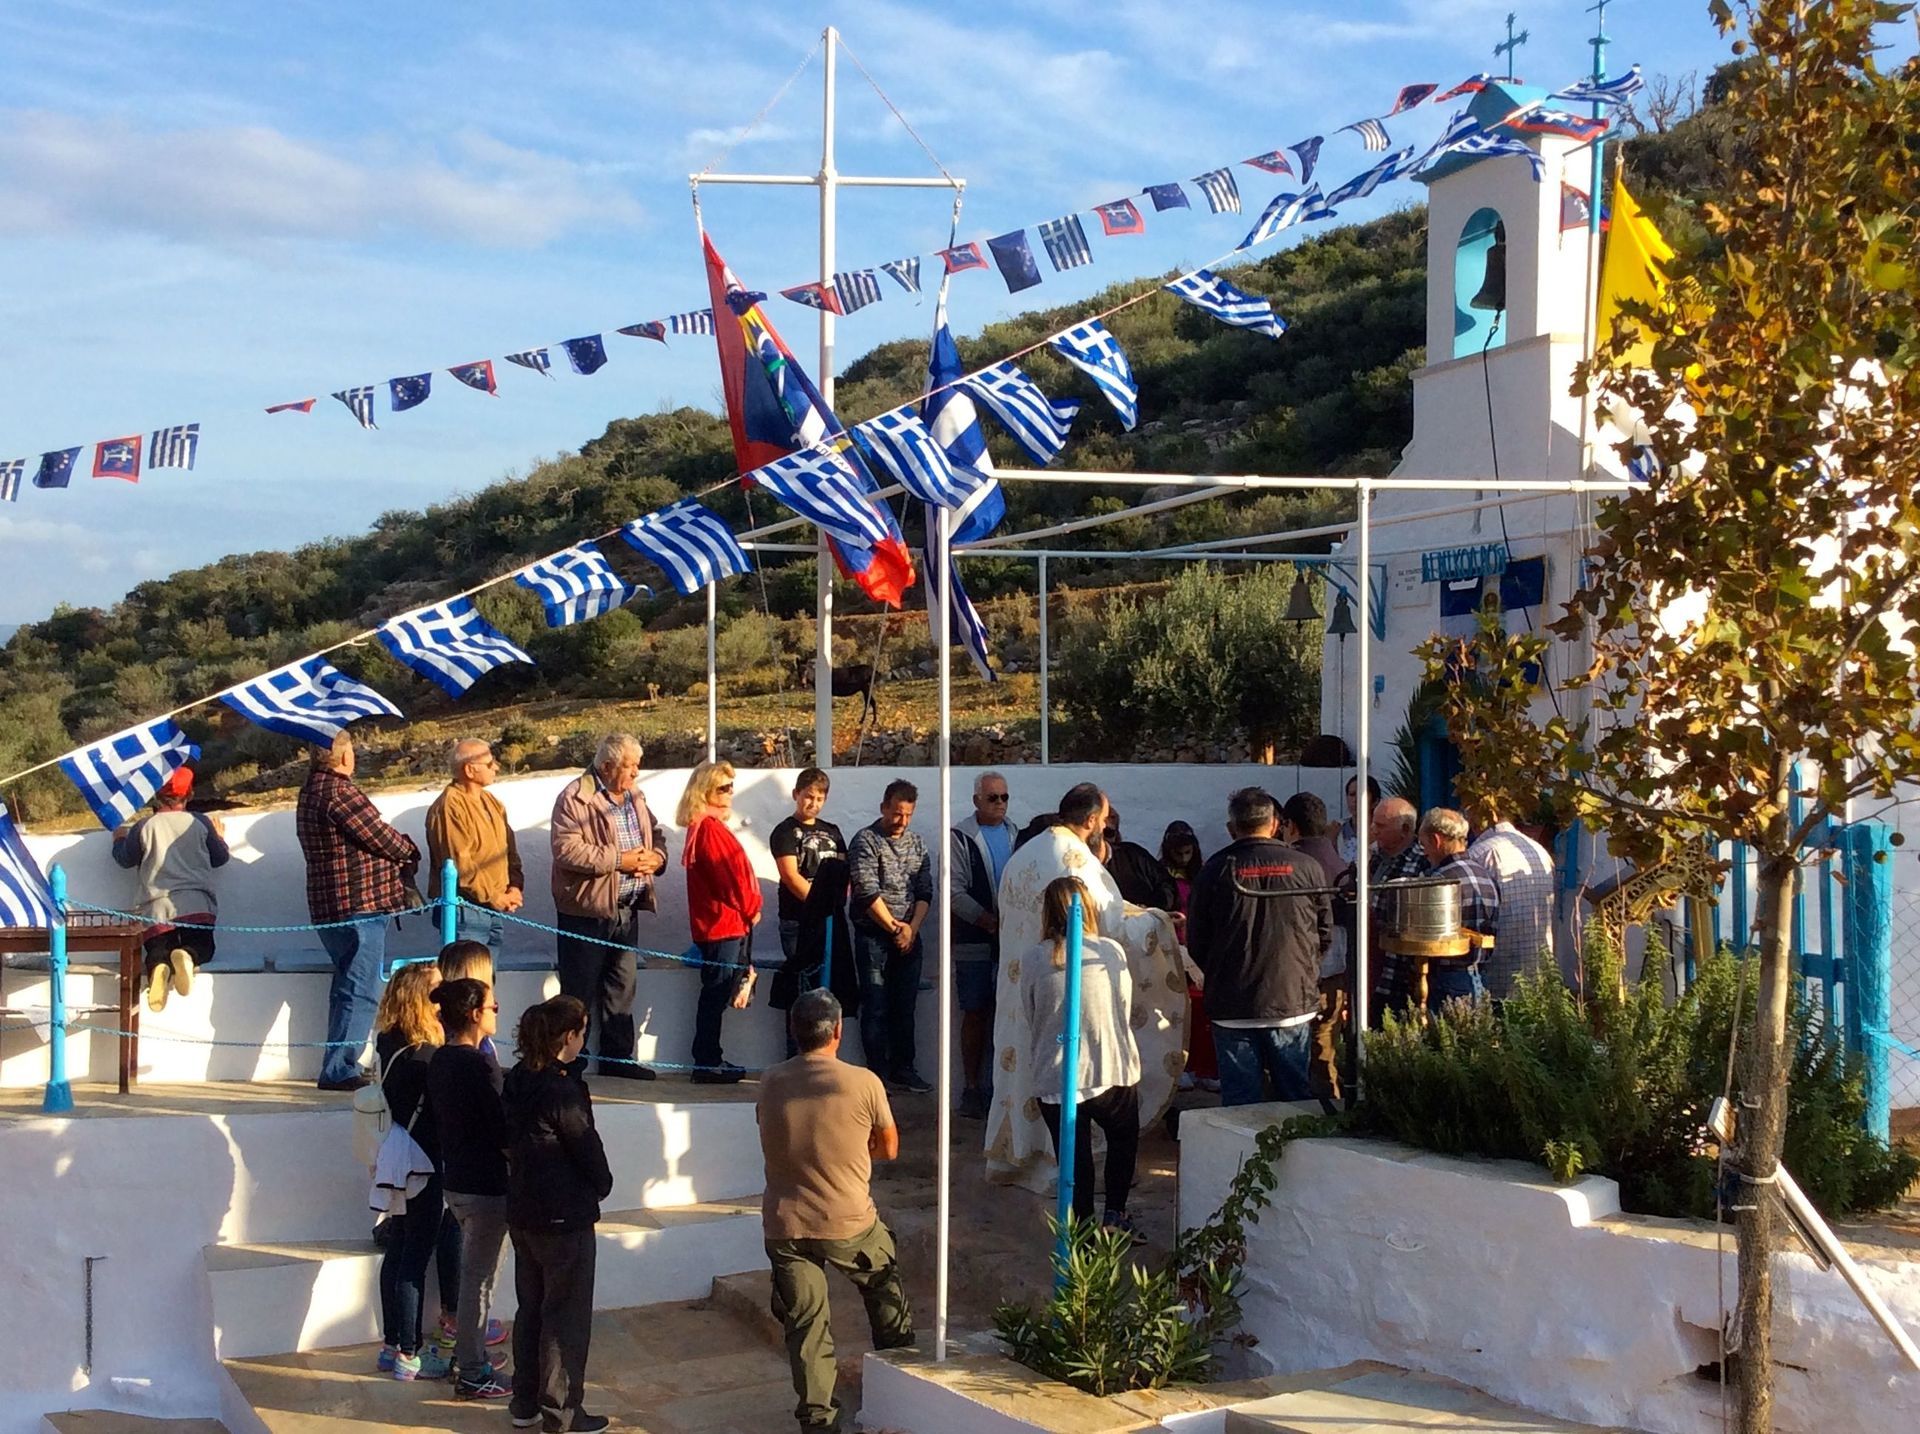 Sunday Mass in Pevges on Hydra Island, Greece, at Saint Nicolaos Chapel, 10th October 2018.